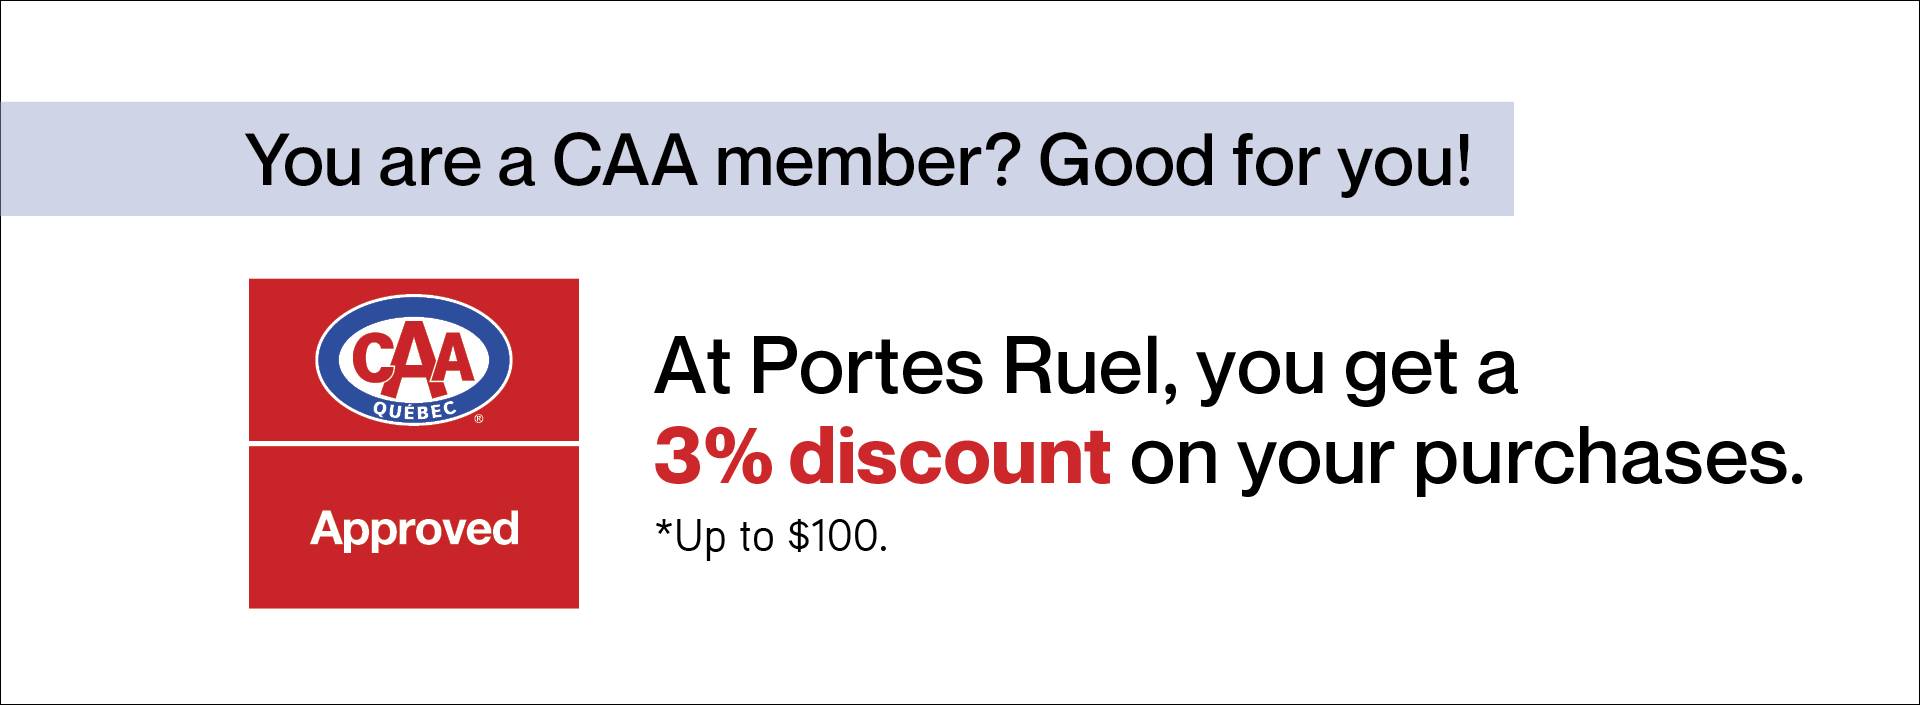 You are a CAA member?